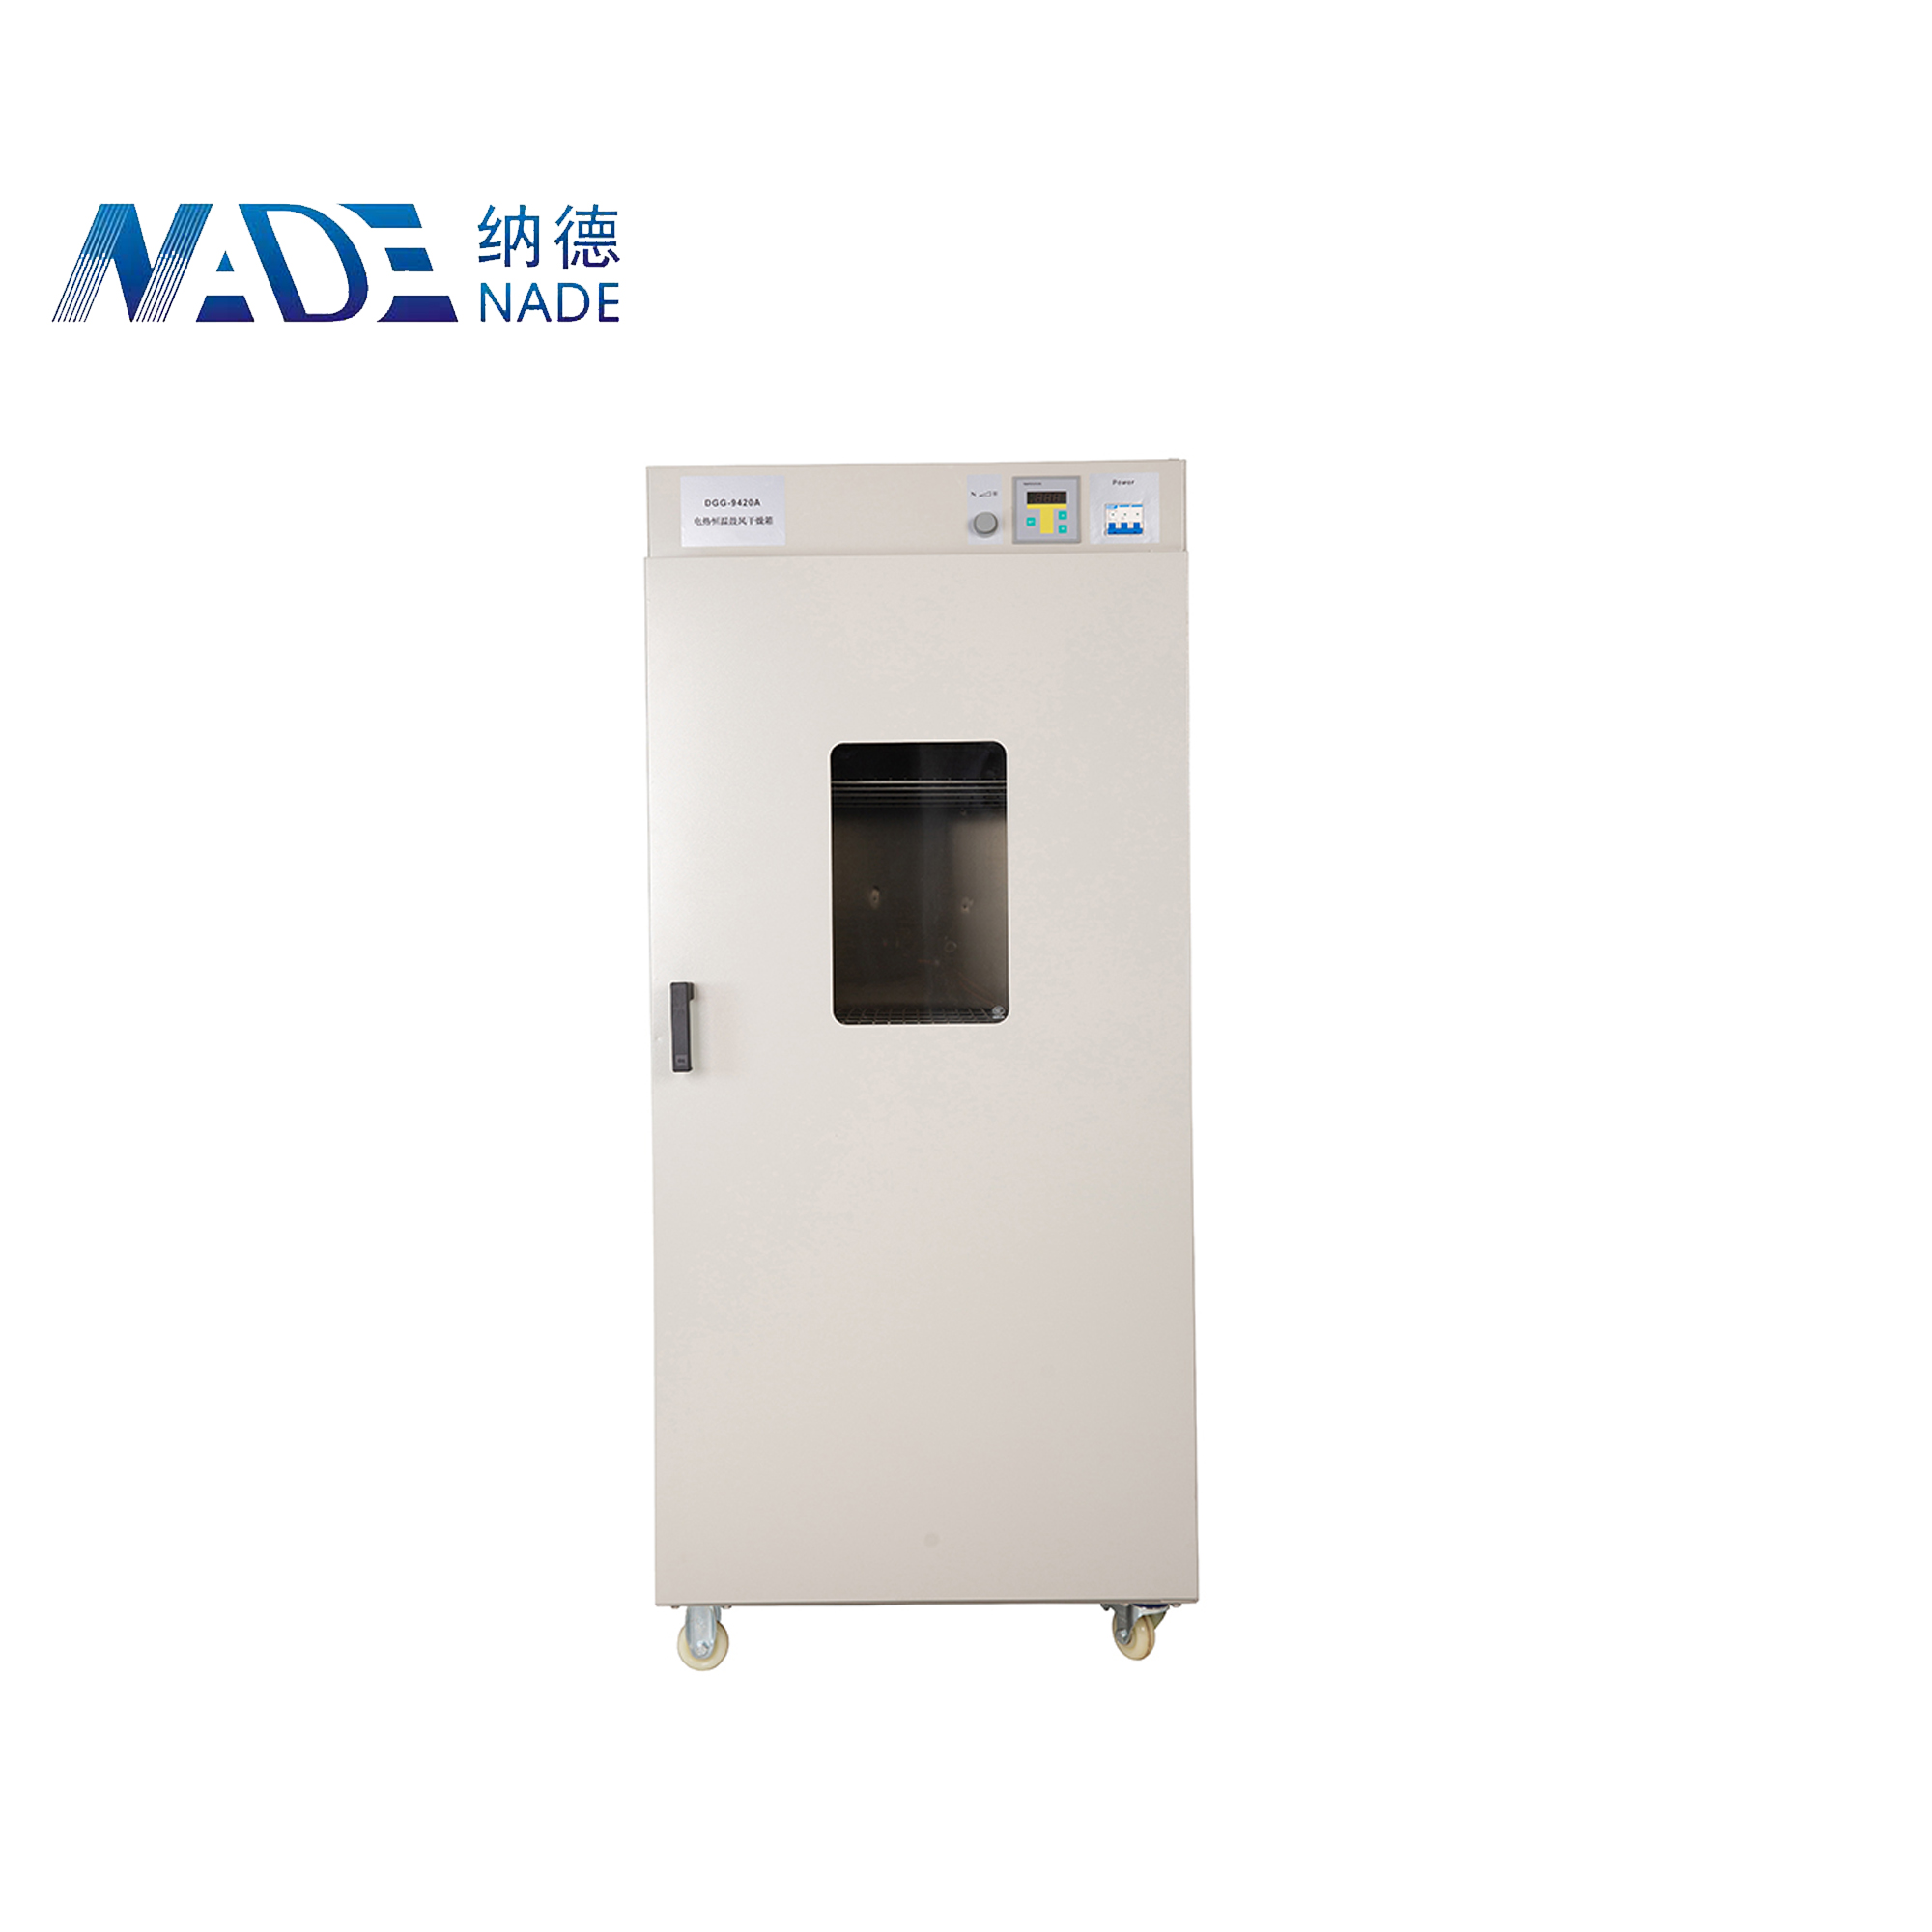 Nade Lab Electric Heating Hot air Dry Convection Oven DGG-9620BD +10-300C 620L